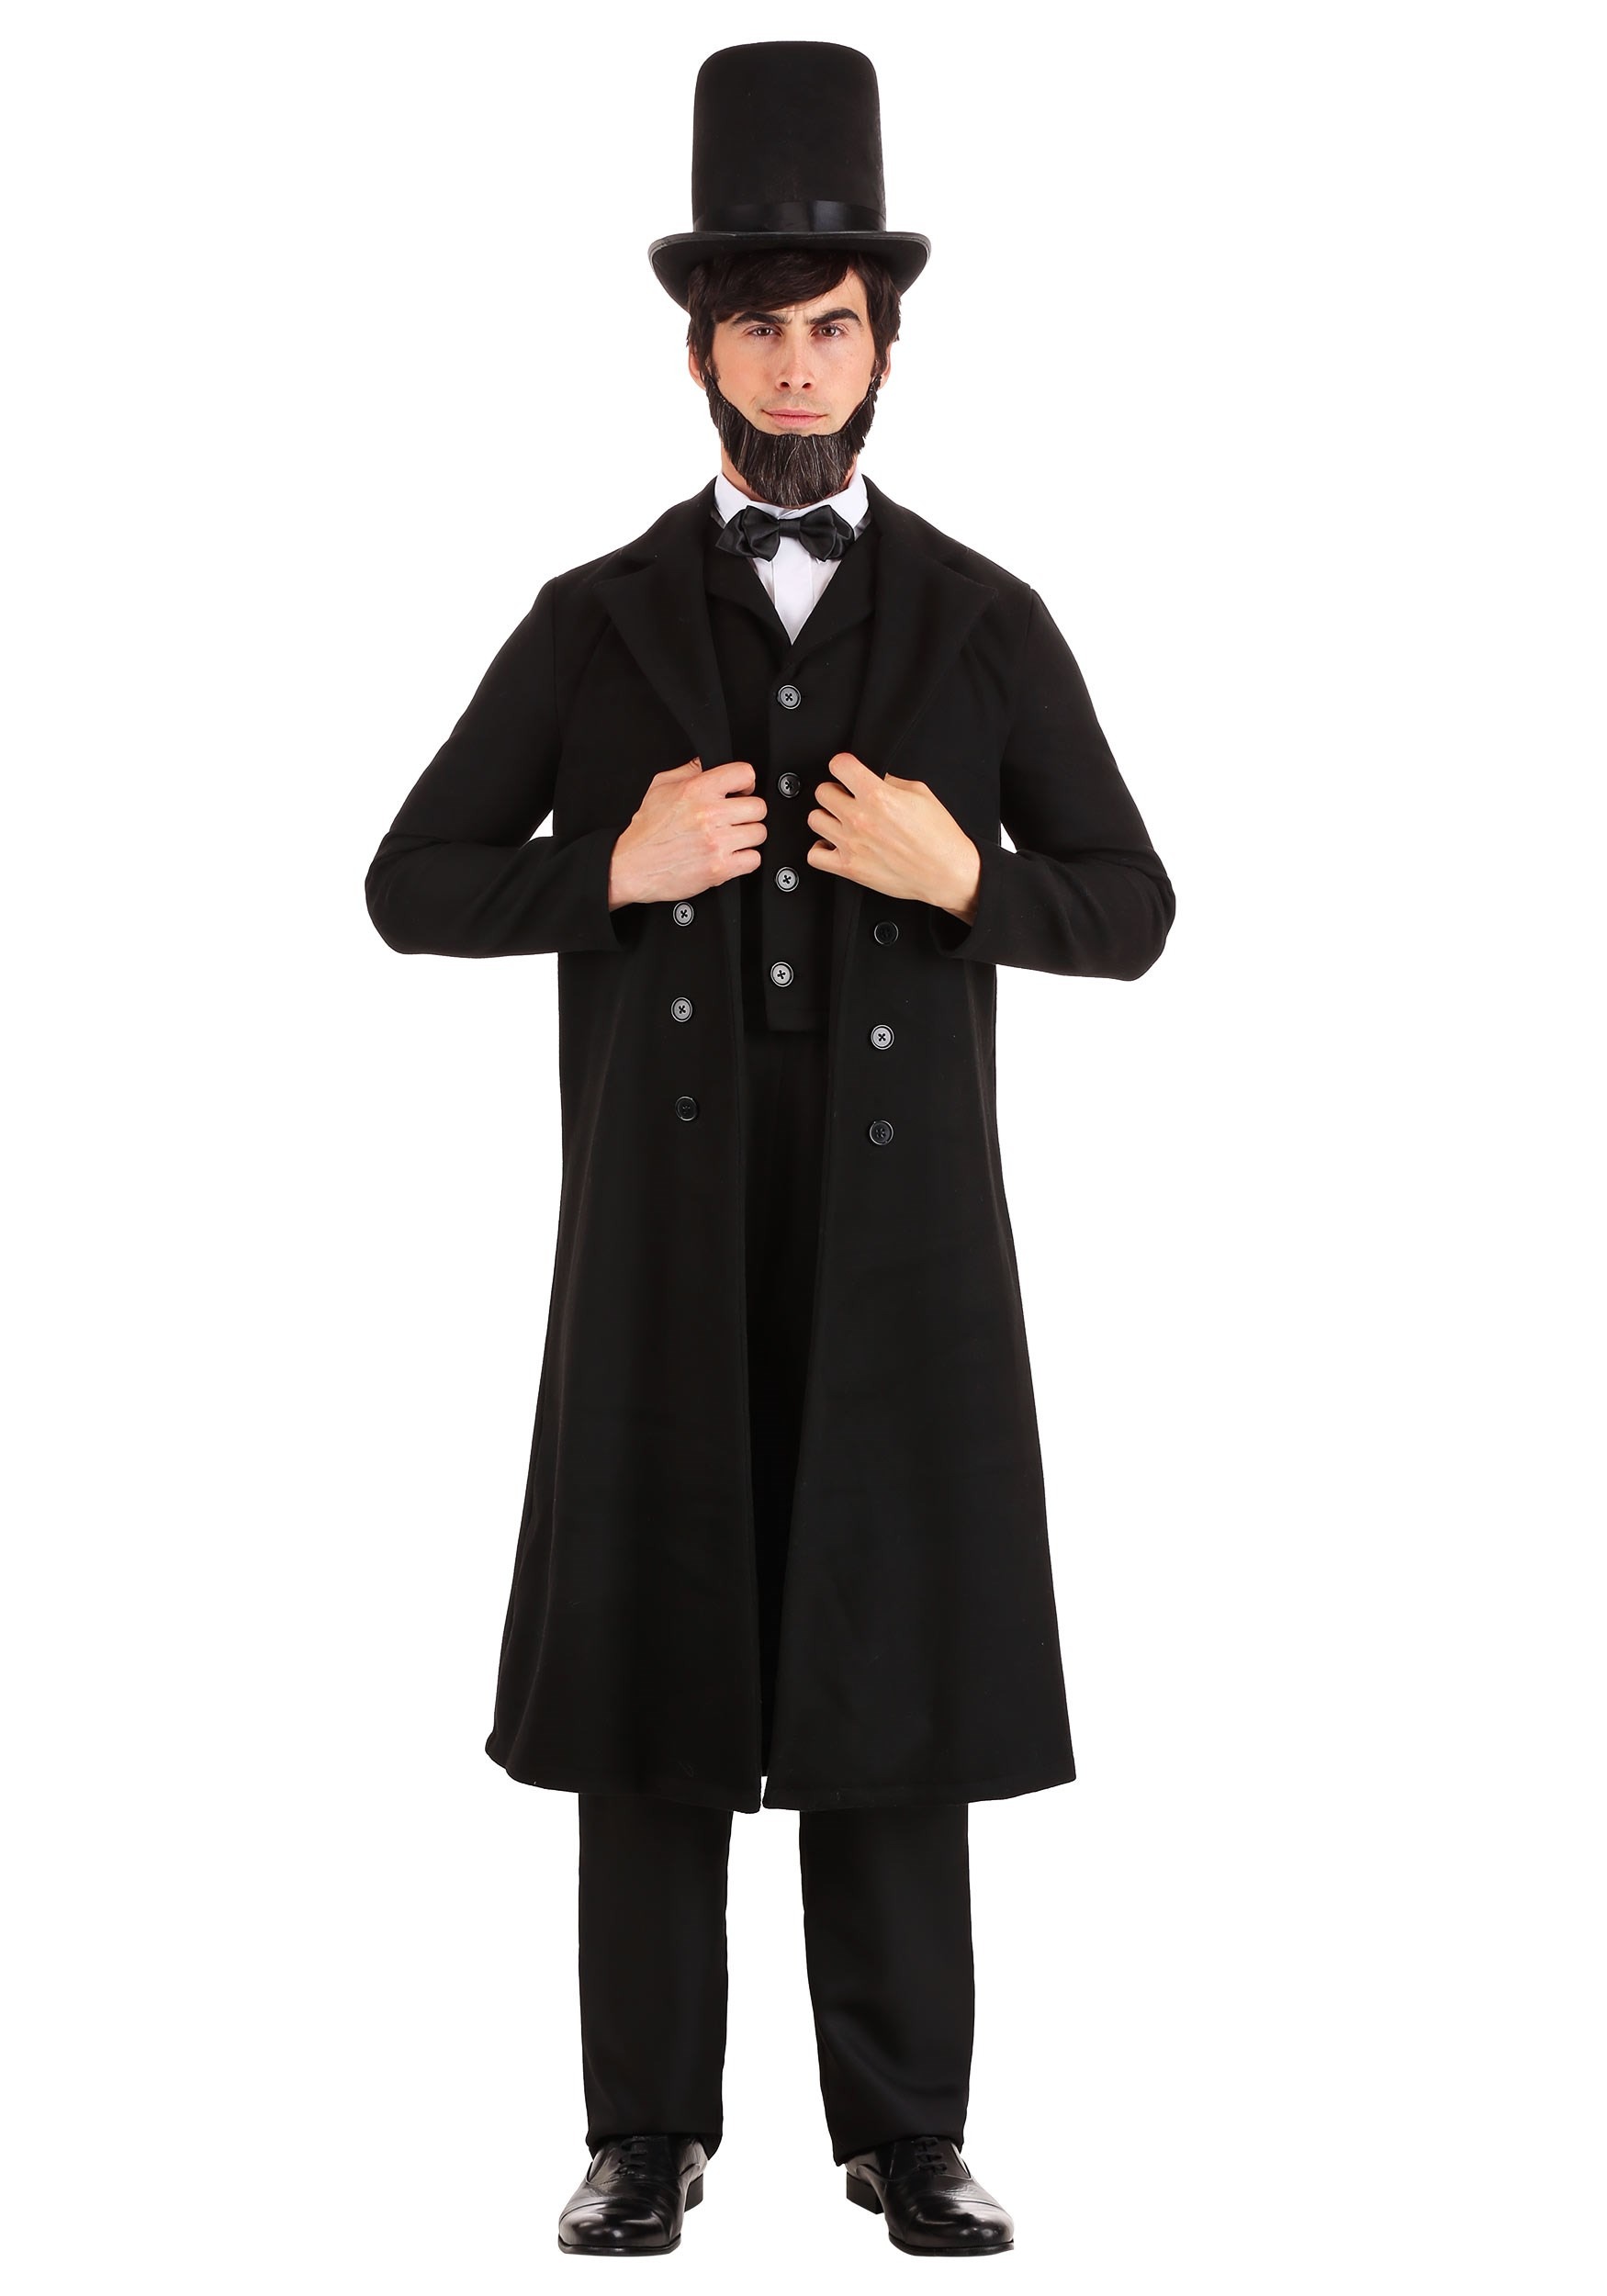 Photos - Fancy Dress President FUN Costumes  Abe Lincoln Costume for Adults Black FUN0924AD 